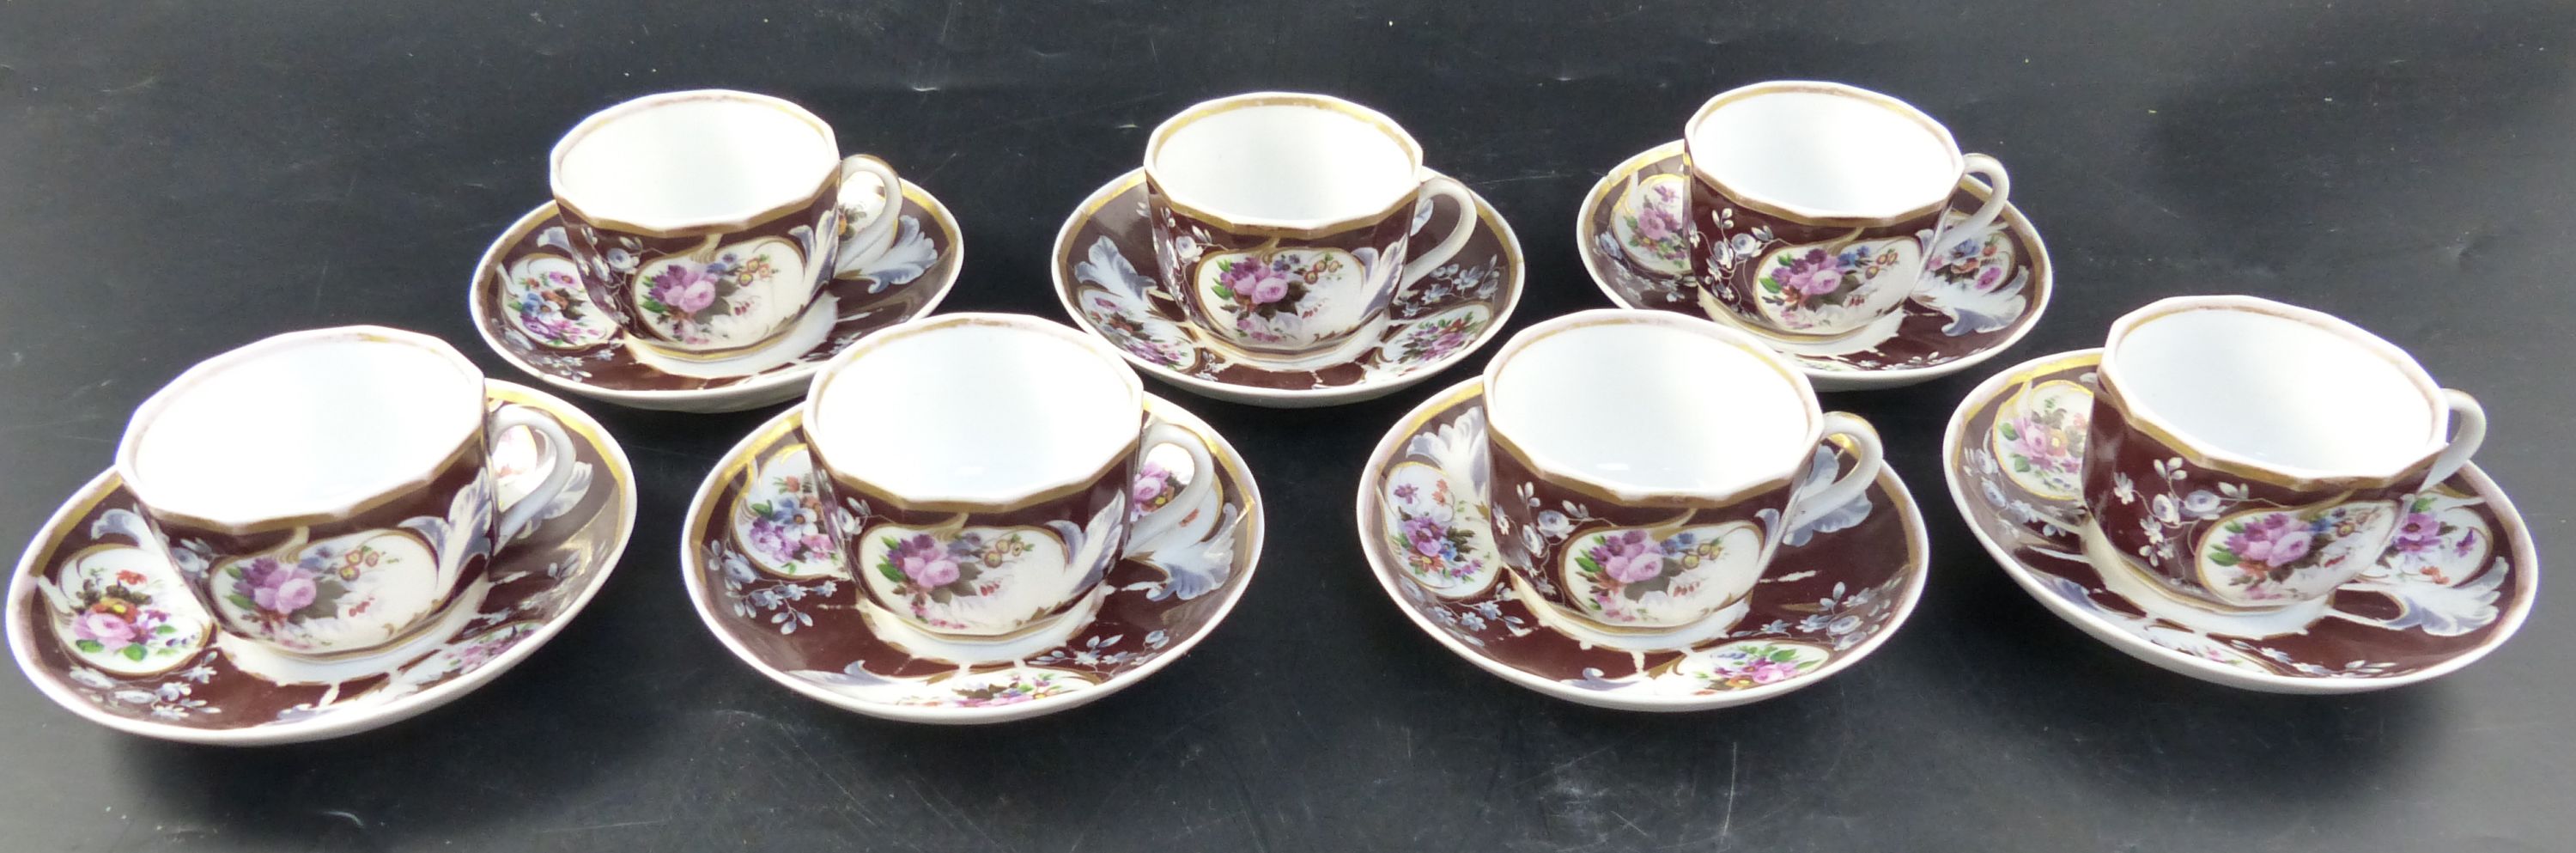 A set of seven Continental porcelain tea cups and saucers